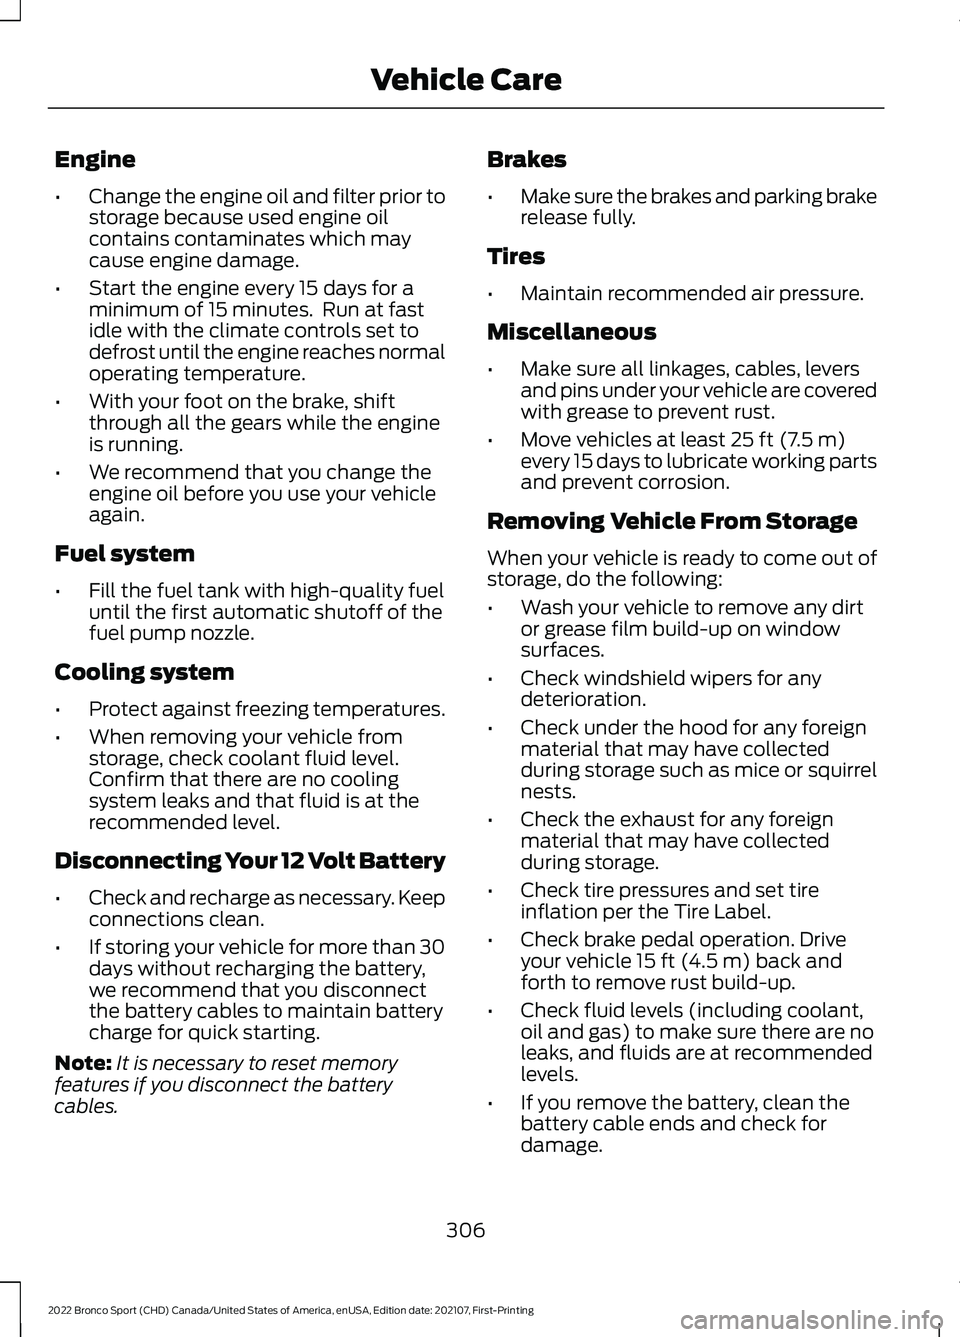 FORD BRONCO SPORT 2022  Owners Manual Engine
•
Change the engine oil and filter prior to
storage because used engine oil
contains contaminates which may
cause engine damage.
• Start the engine every 15 days for a
minimum of 15 minutes